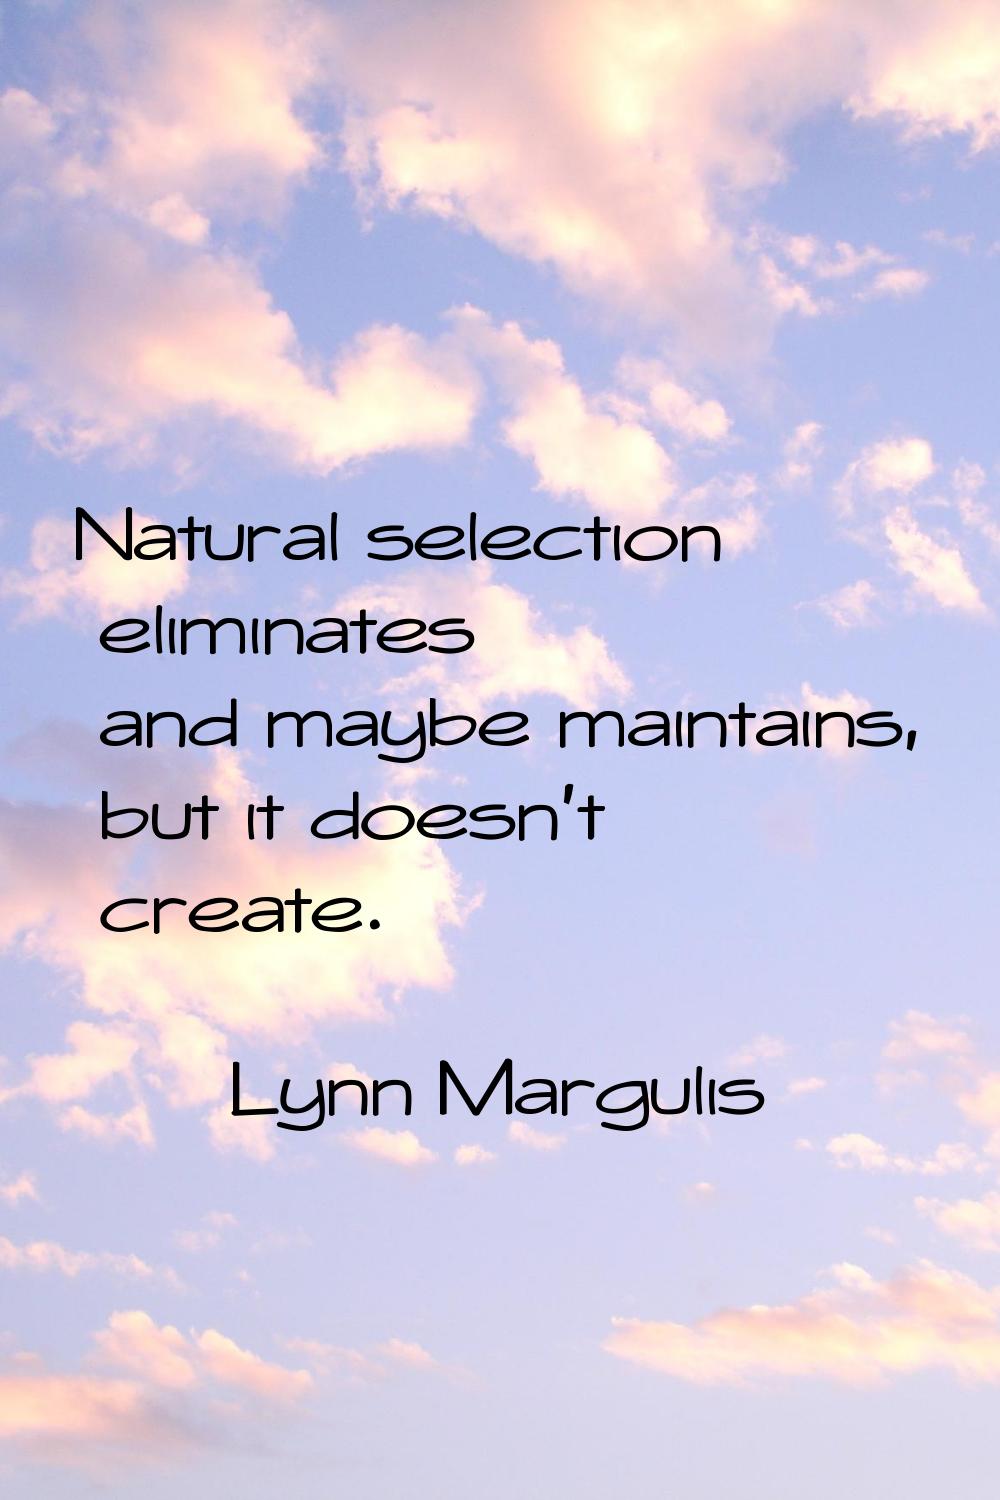 Natural selection eliminates and maybe maintains, but it doesn't create.